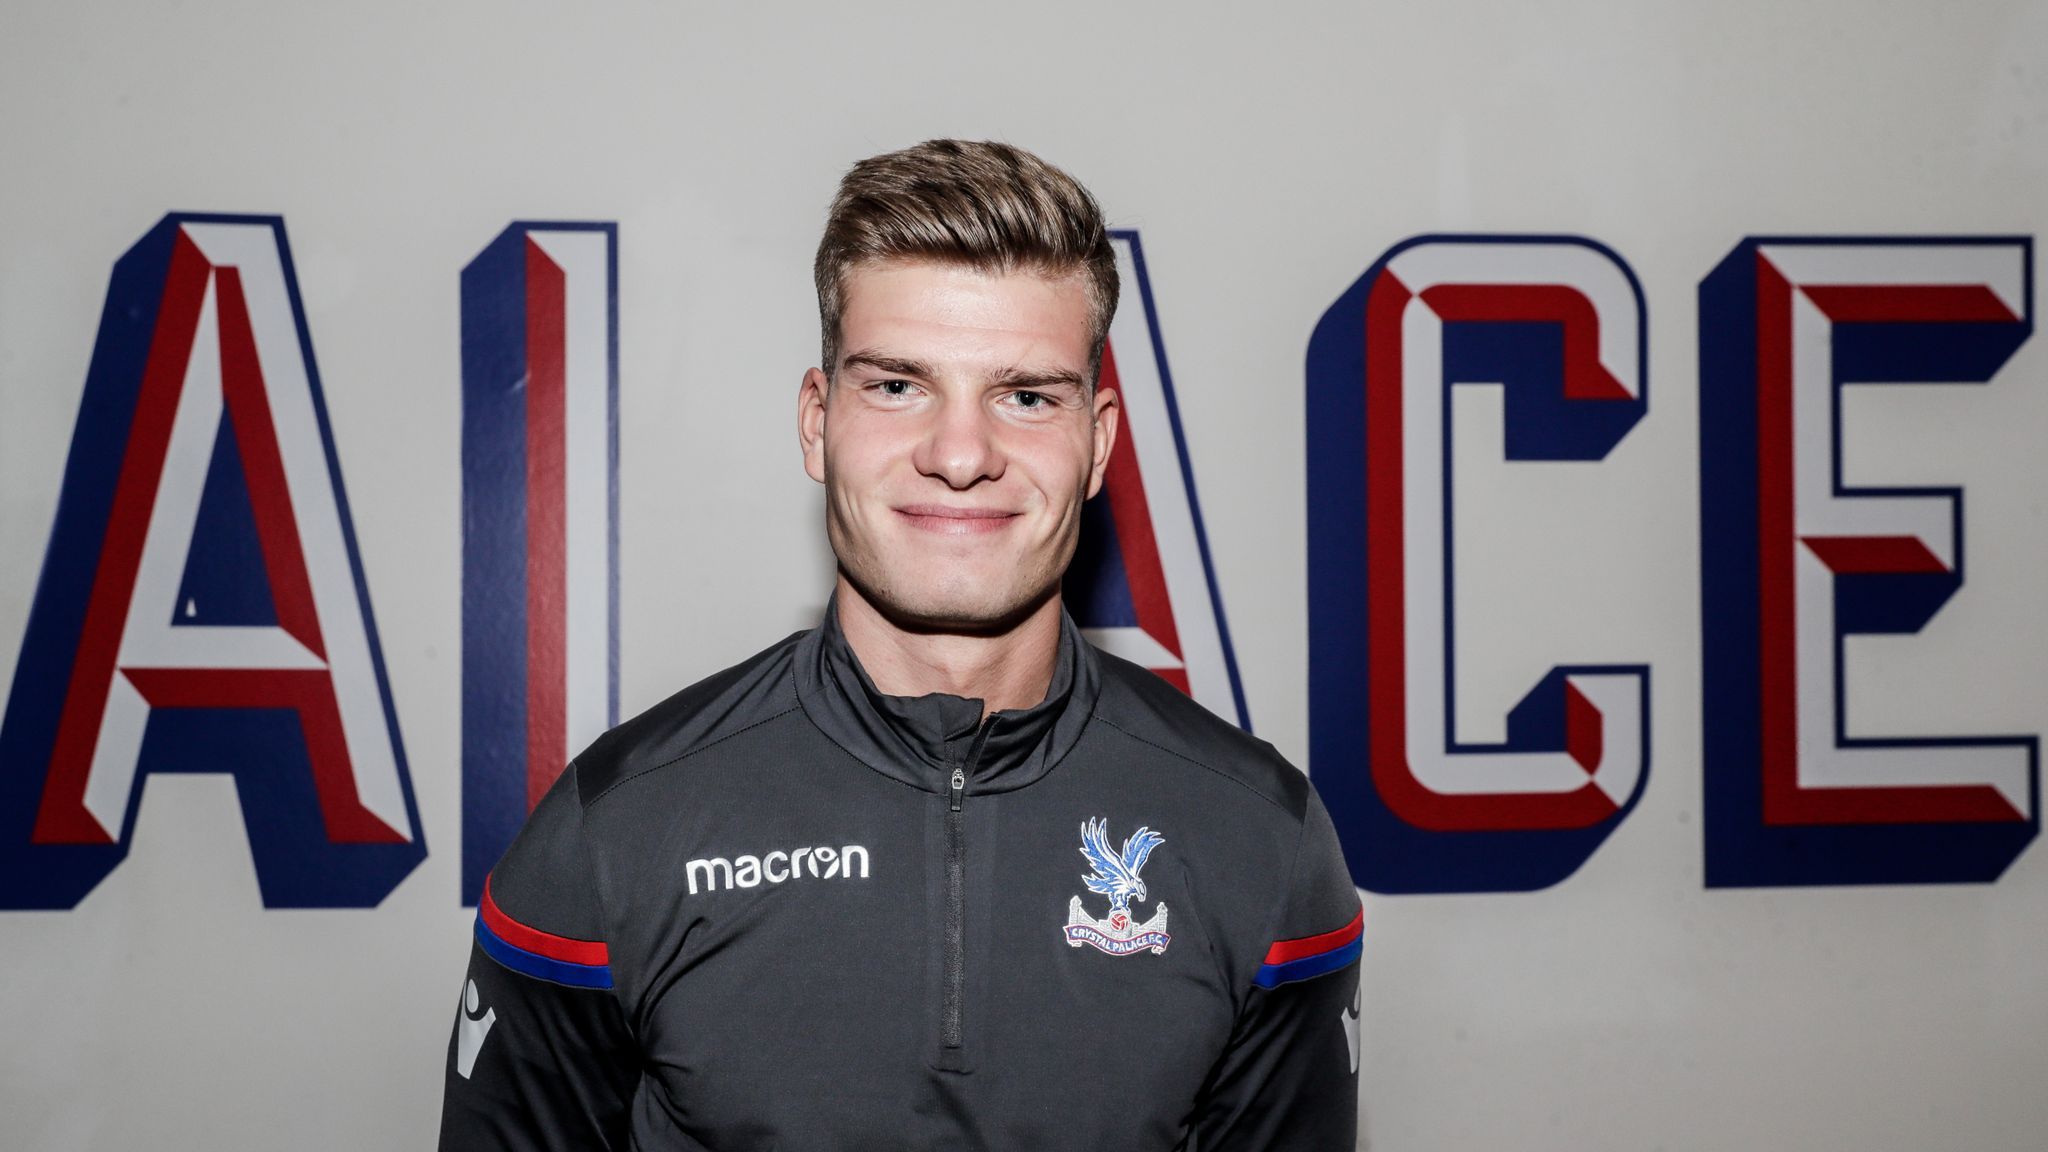 Scouted Football Sørloth (22) is being a